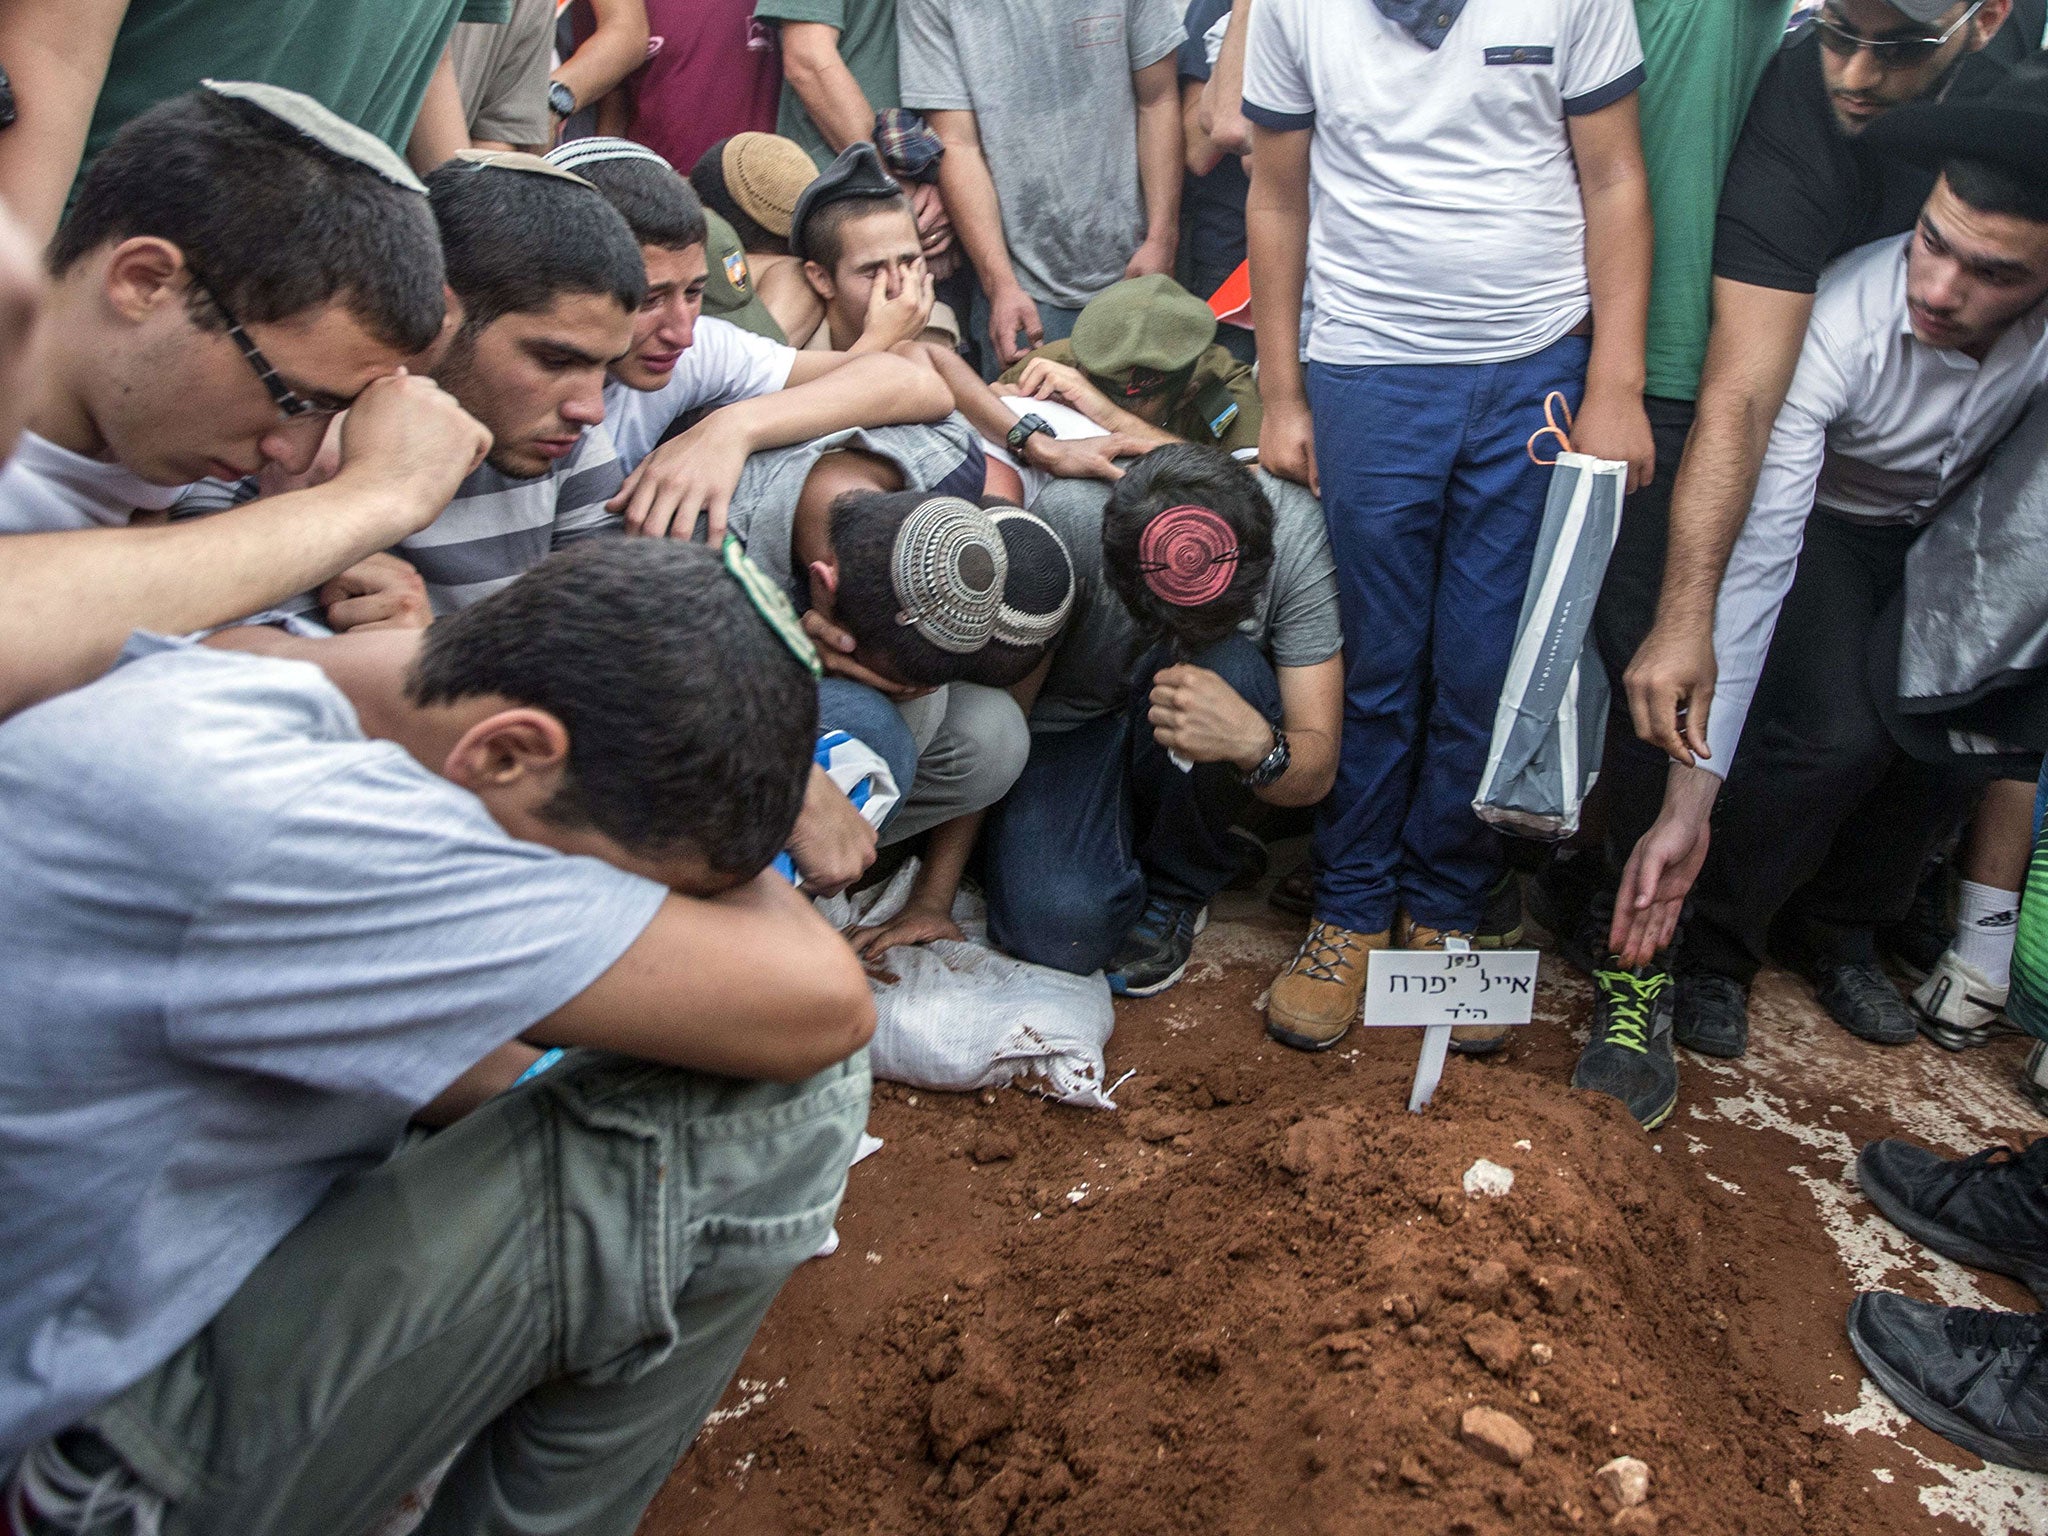 Relatives and friends gather around a grave, as Gilad Shaer, 16, Naftali Frenkel, 16, and Eyal Ifrach, 19, are buried side-by-side in the central Israeli town of Modiin